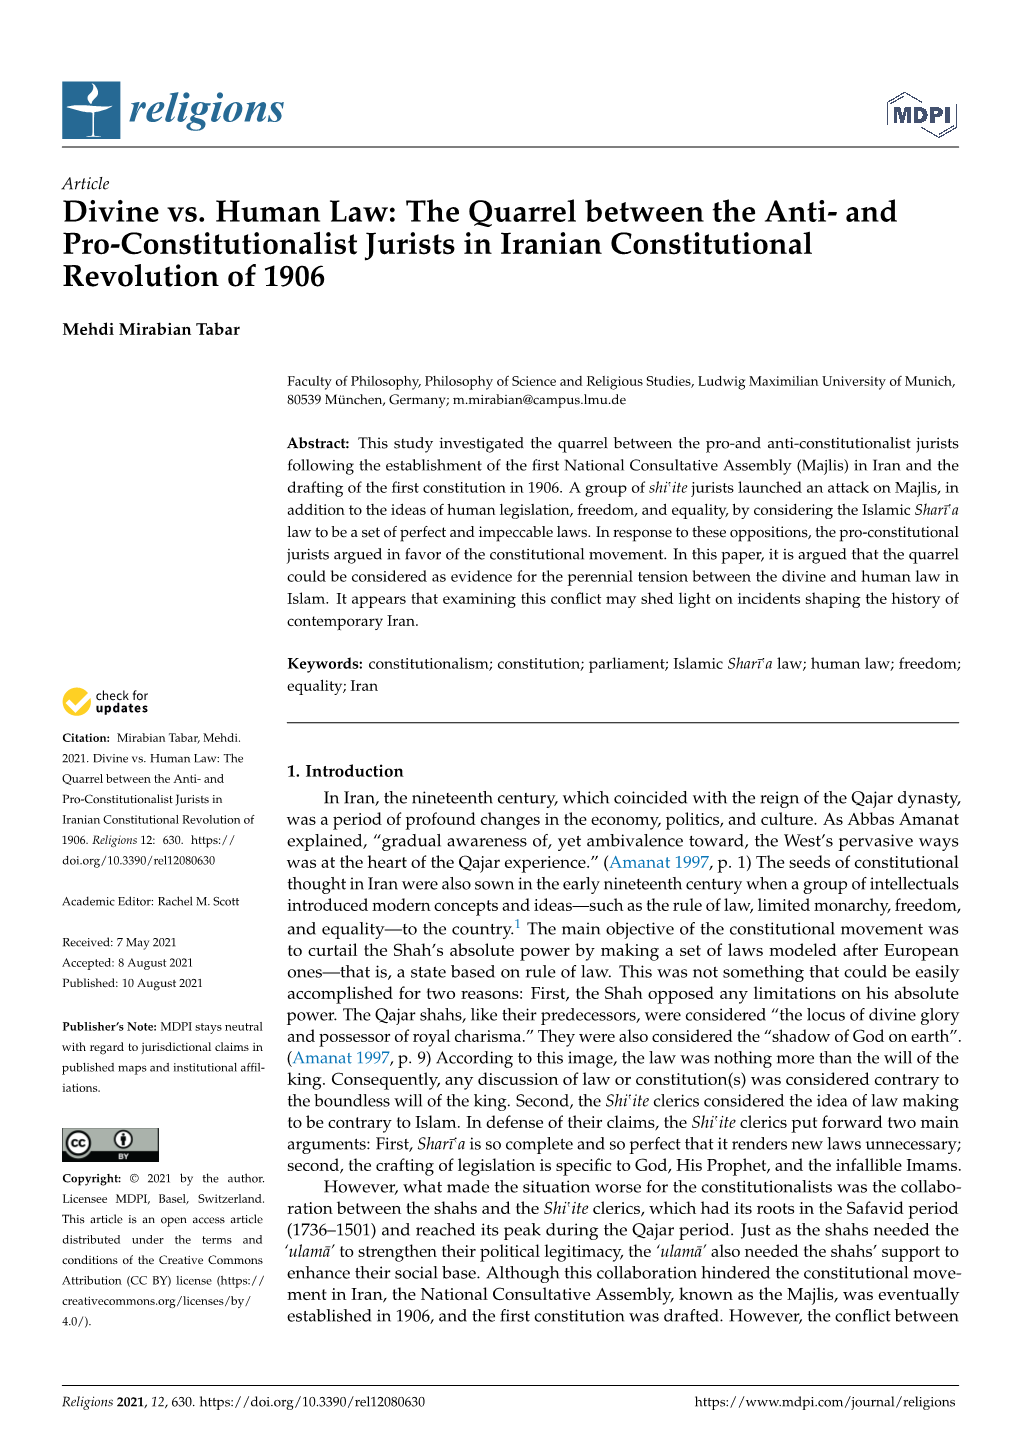 The Quarrel Between the Anti- and Pro-Constitutionalist Jurists in Iranian Constitutional Revolution of 1906